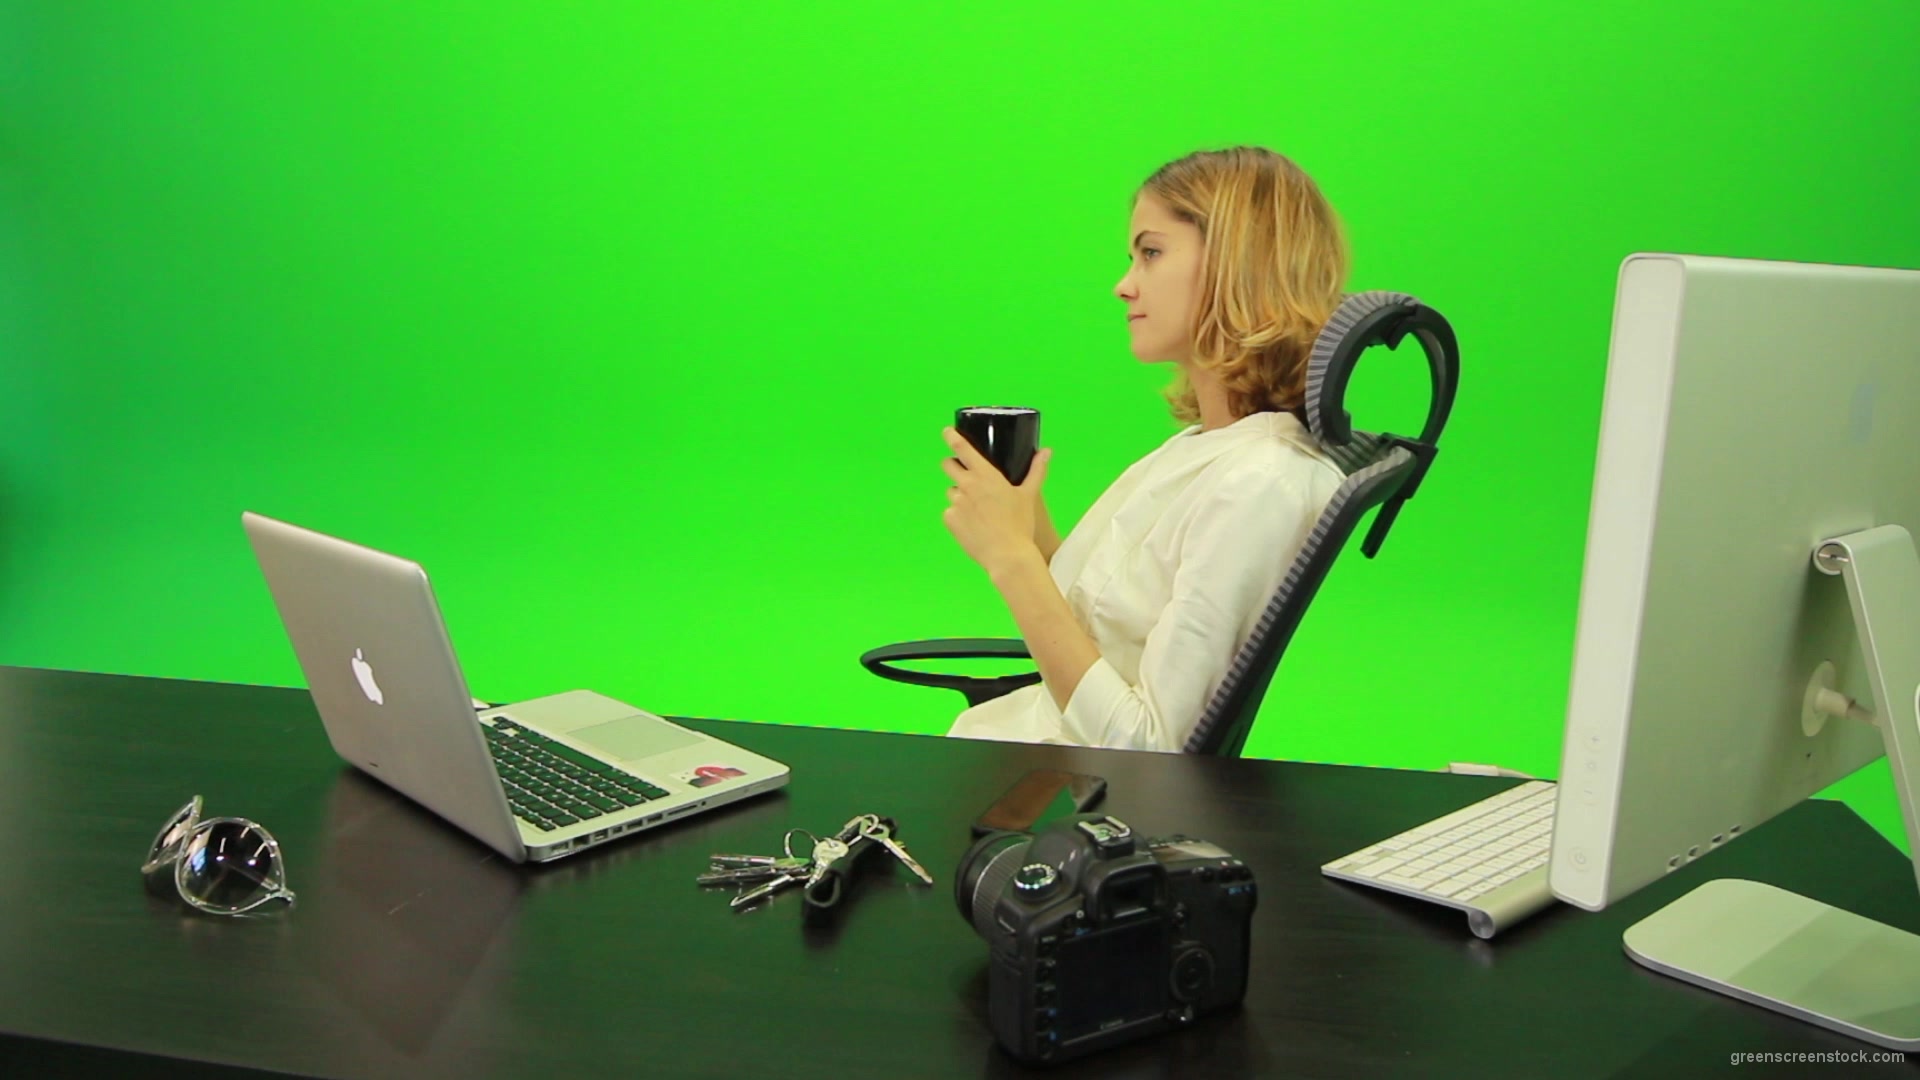 Business-Woman-Relaxing-and-Drinking-Coffee-after-Hard-Work-Green-Screen-Footage_007 Green Screen Stock